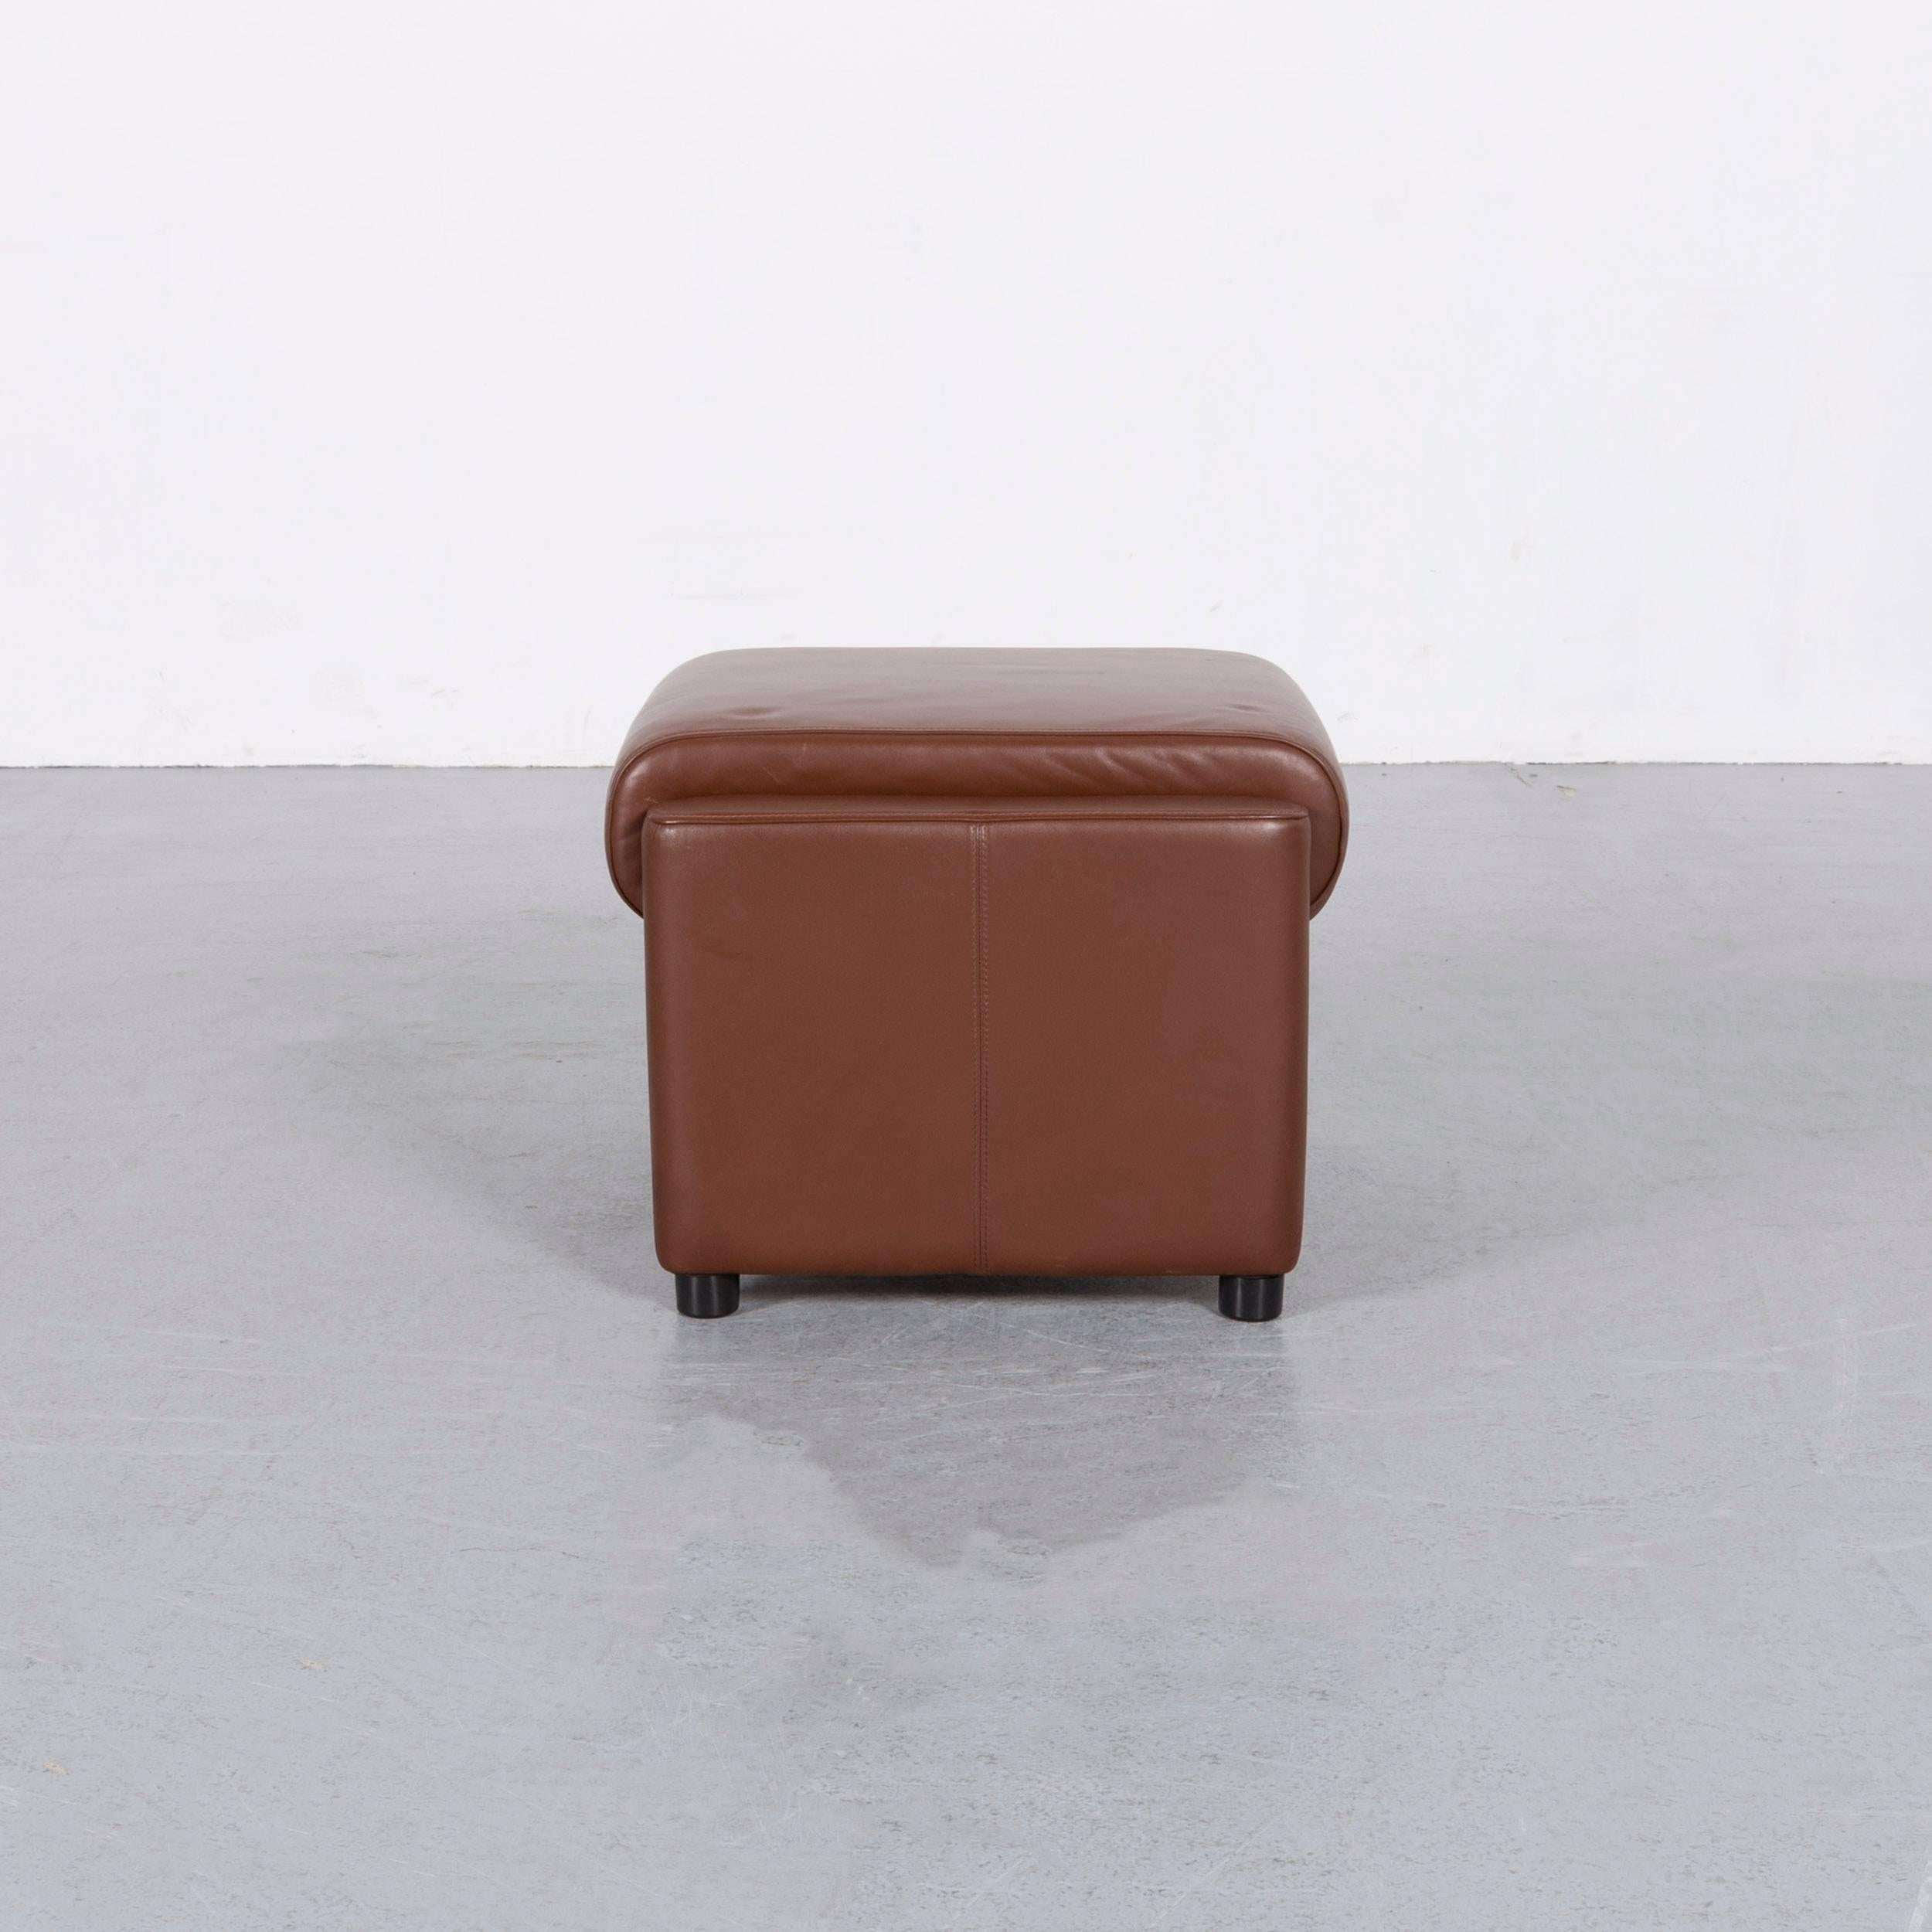 German Erpo Designer Footstool Leather Brown Sofa Couch For Sale